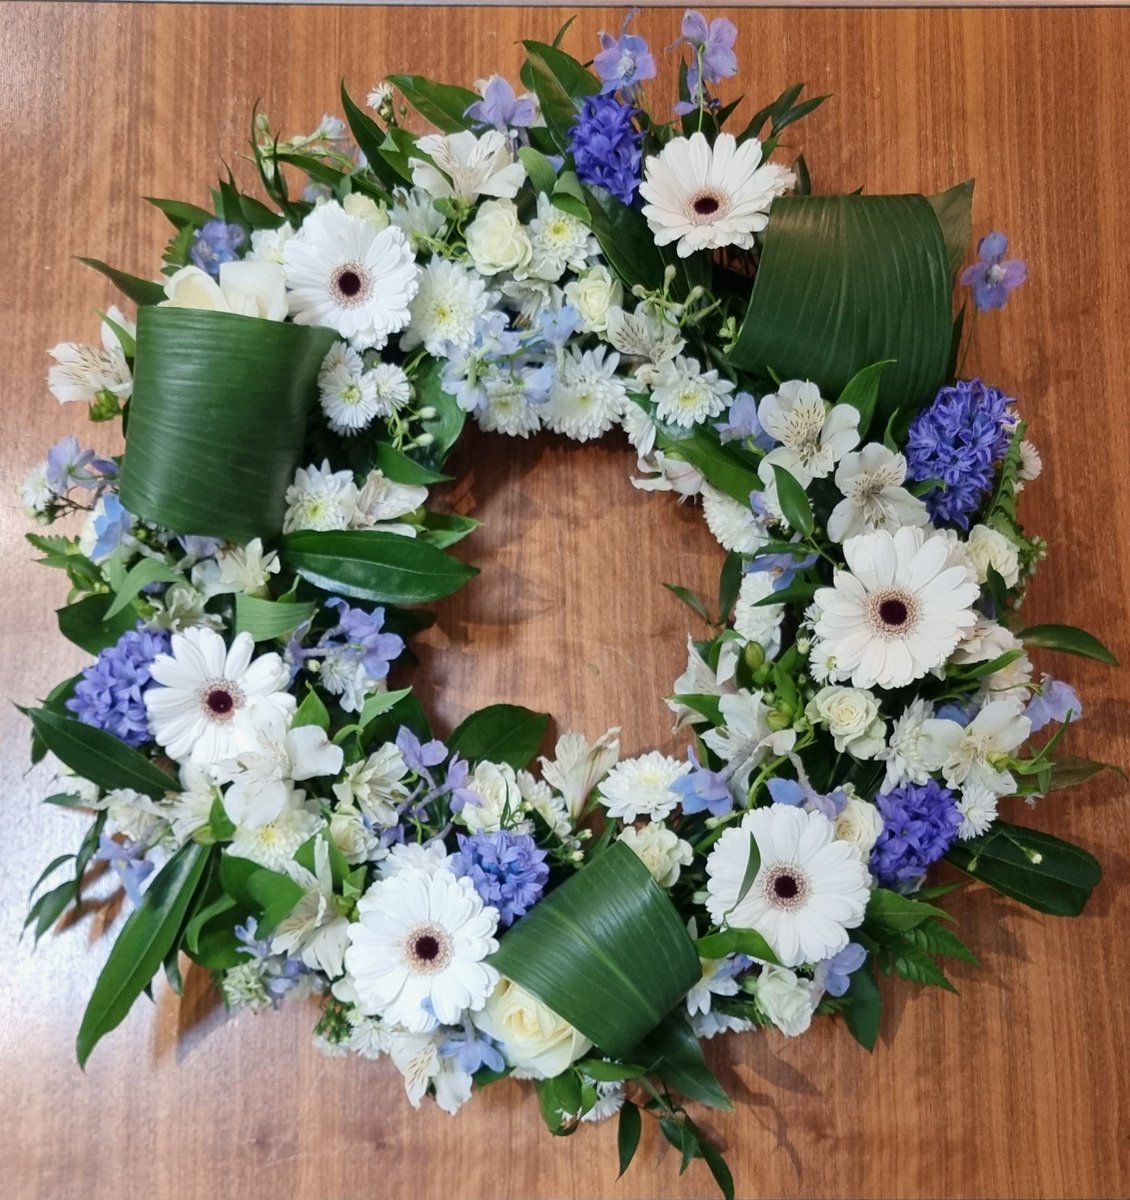 We mark today, International Workers Memorial Day #IWMD23 we remember the dead and fight for the living. #London #Mesothelioma #asbestos 

If you have been affected by an asbestos disease please contact support@lasag.org.uk